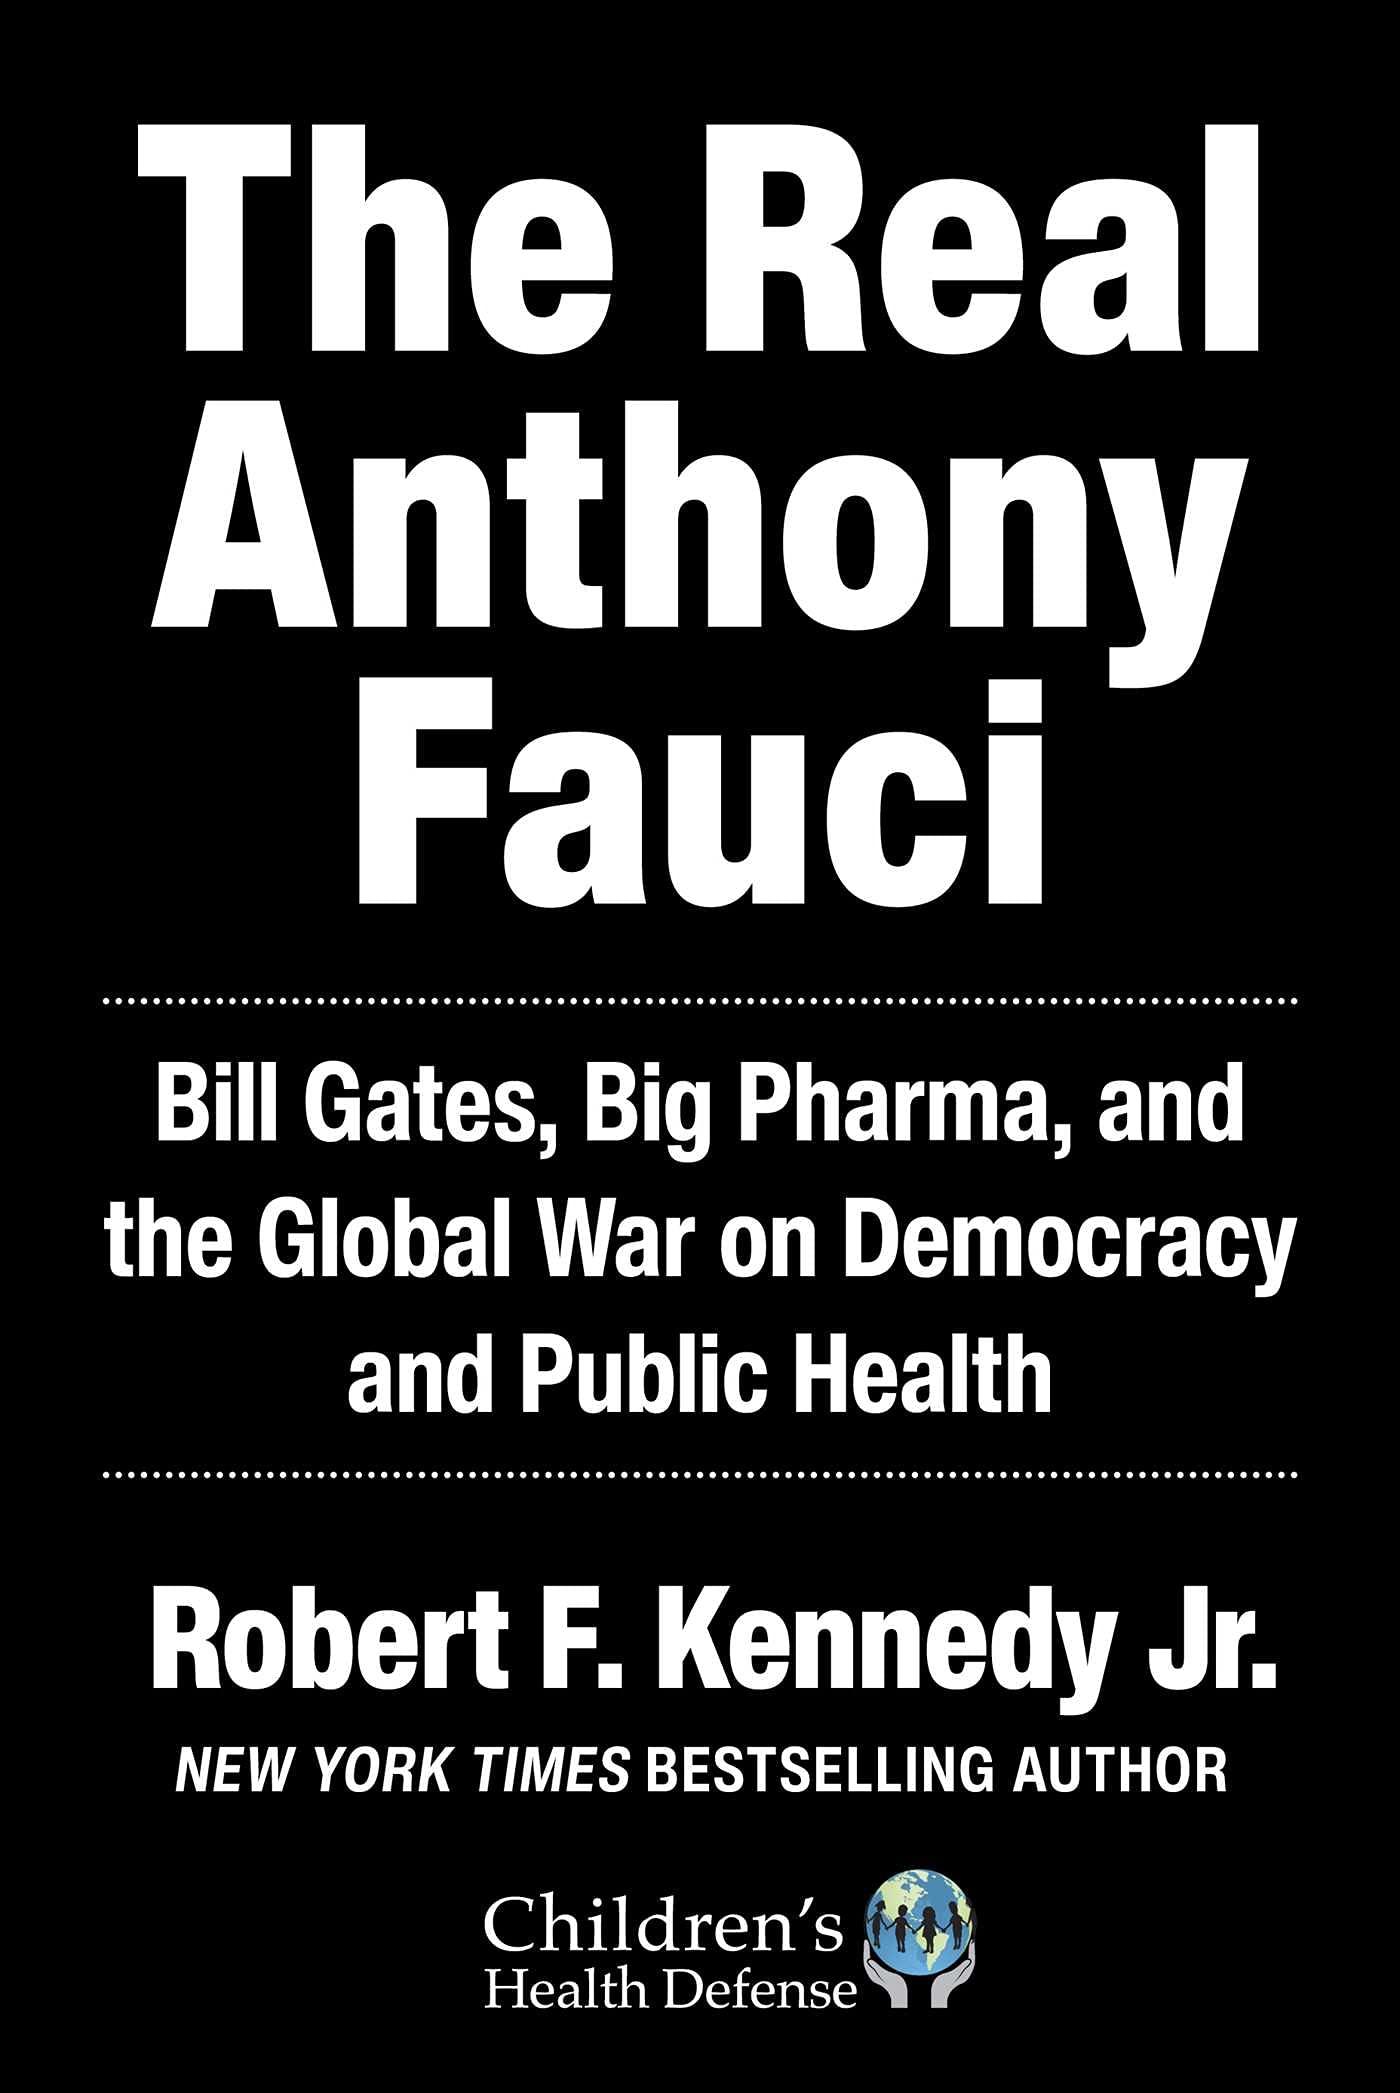 Real Anthony Fauci: Bill Gates, Big Pharma, and the Global War on Democracy and Public Health (Children’s Health Defense)